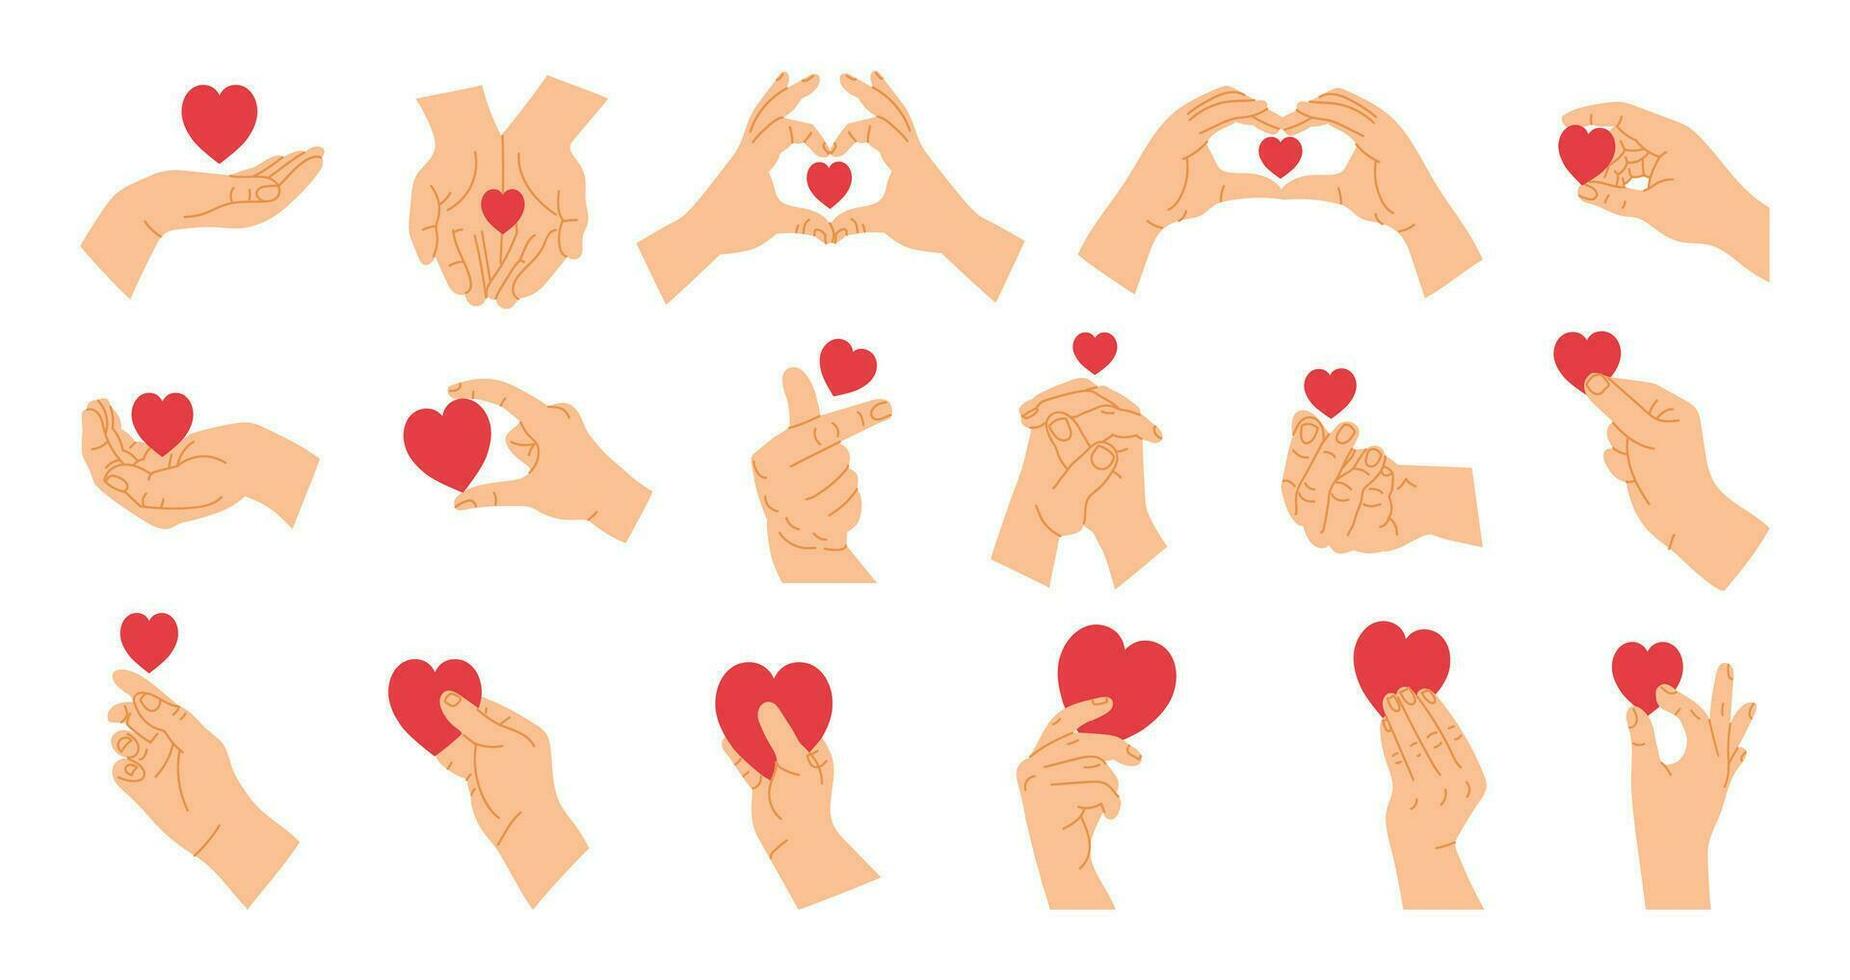 Cartoon hands with heart. Red heart in expression hands, gesture poses showing and holding love shape. Romance design concept with palm and fingers for Valentines Day vector set